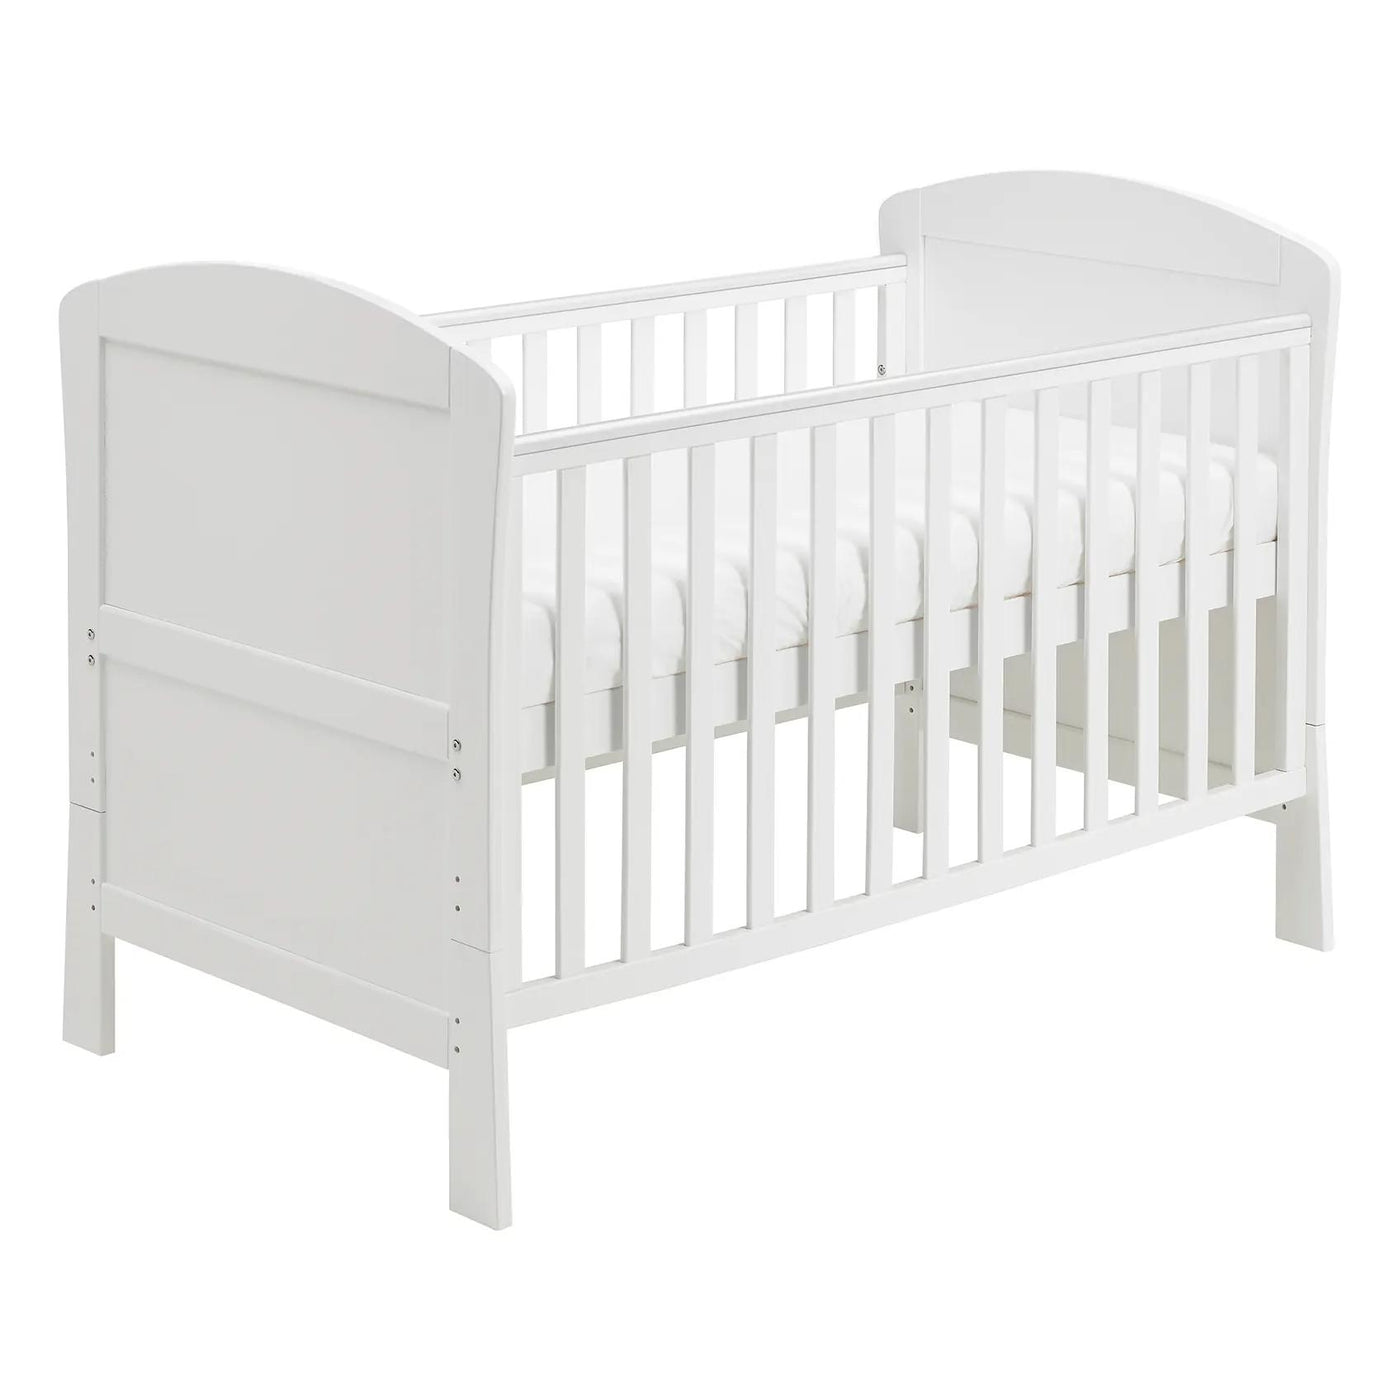 Aston Dropside Cot Bed - White